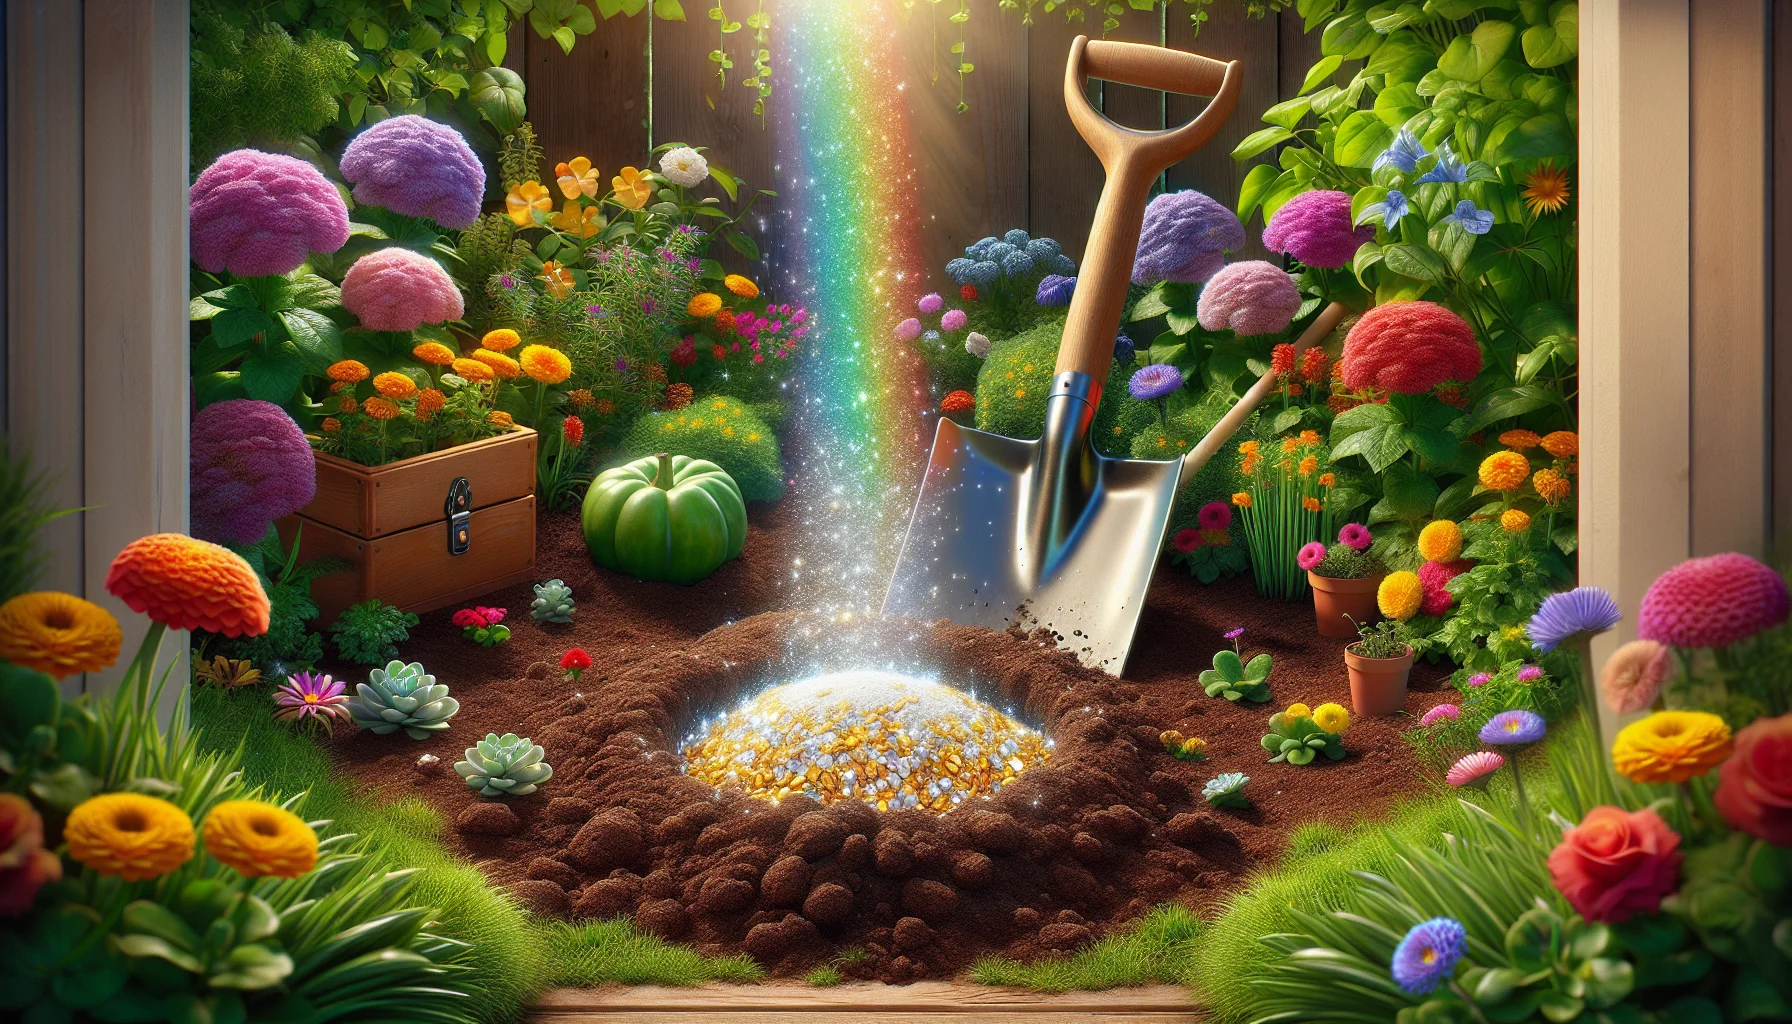 Generate a humorous, realistic image of a colorful garden scene. In this image, there is an unusual occurrence - a sparkling white substance emerging from the productive brown soil. It looks as surprising as finding a pot of gold at the end of a rainbow, making anyone who sees it marvel and smile. The scene is meant to encourage an appreciation for the whimsicality of gardening and nature. Surrounding the soil, there are various vibrant flowers, verdant plants, and a classic wooden gardening shovel. Sunshine is warmly illuminating this curious and entertaining garden setup.